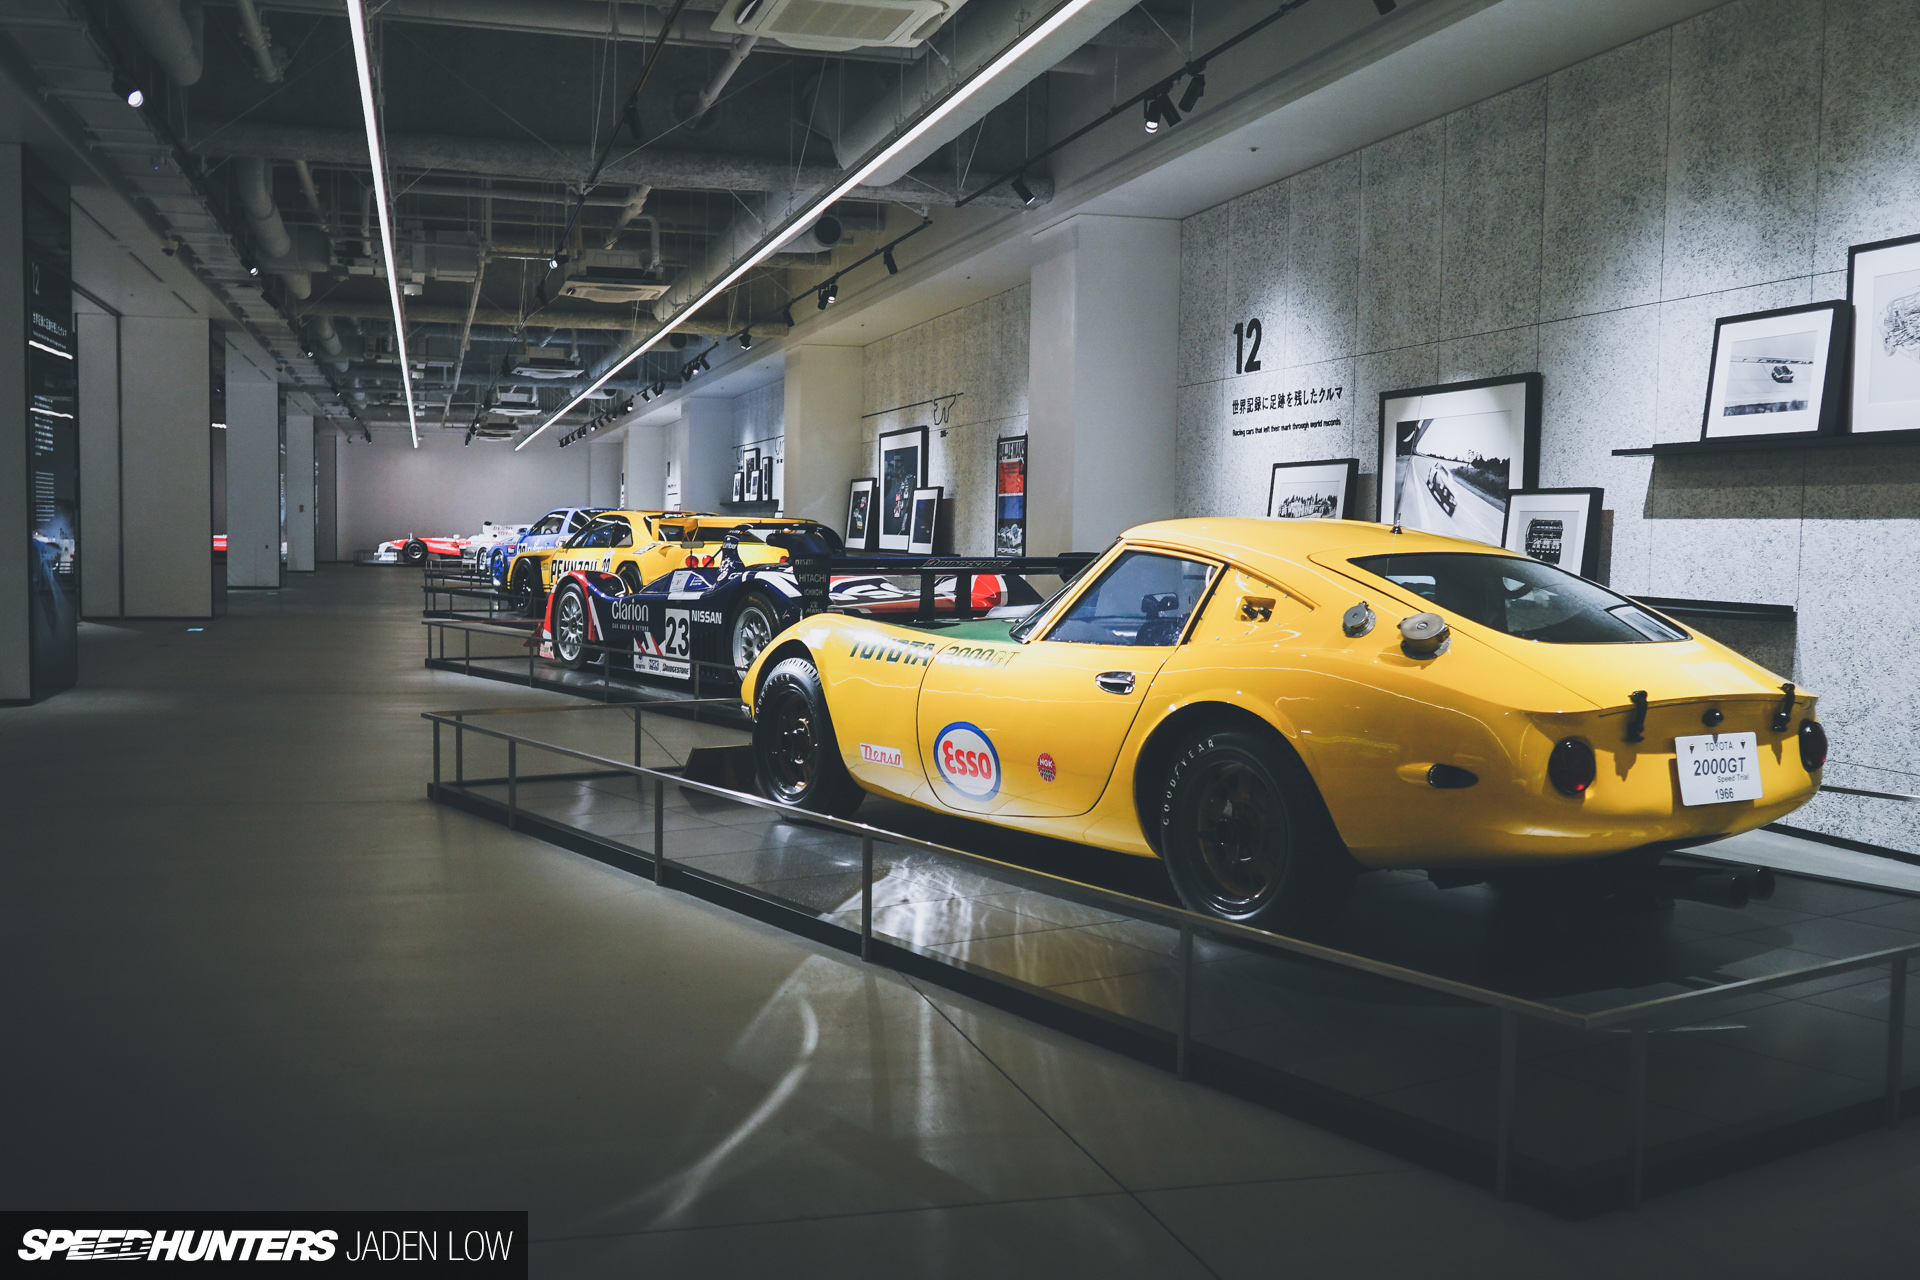 Nerding Out At The Fuji Motorsports Museum